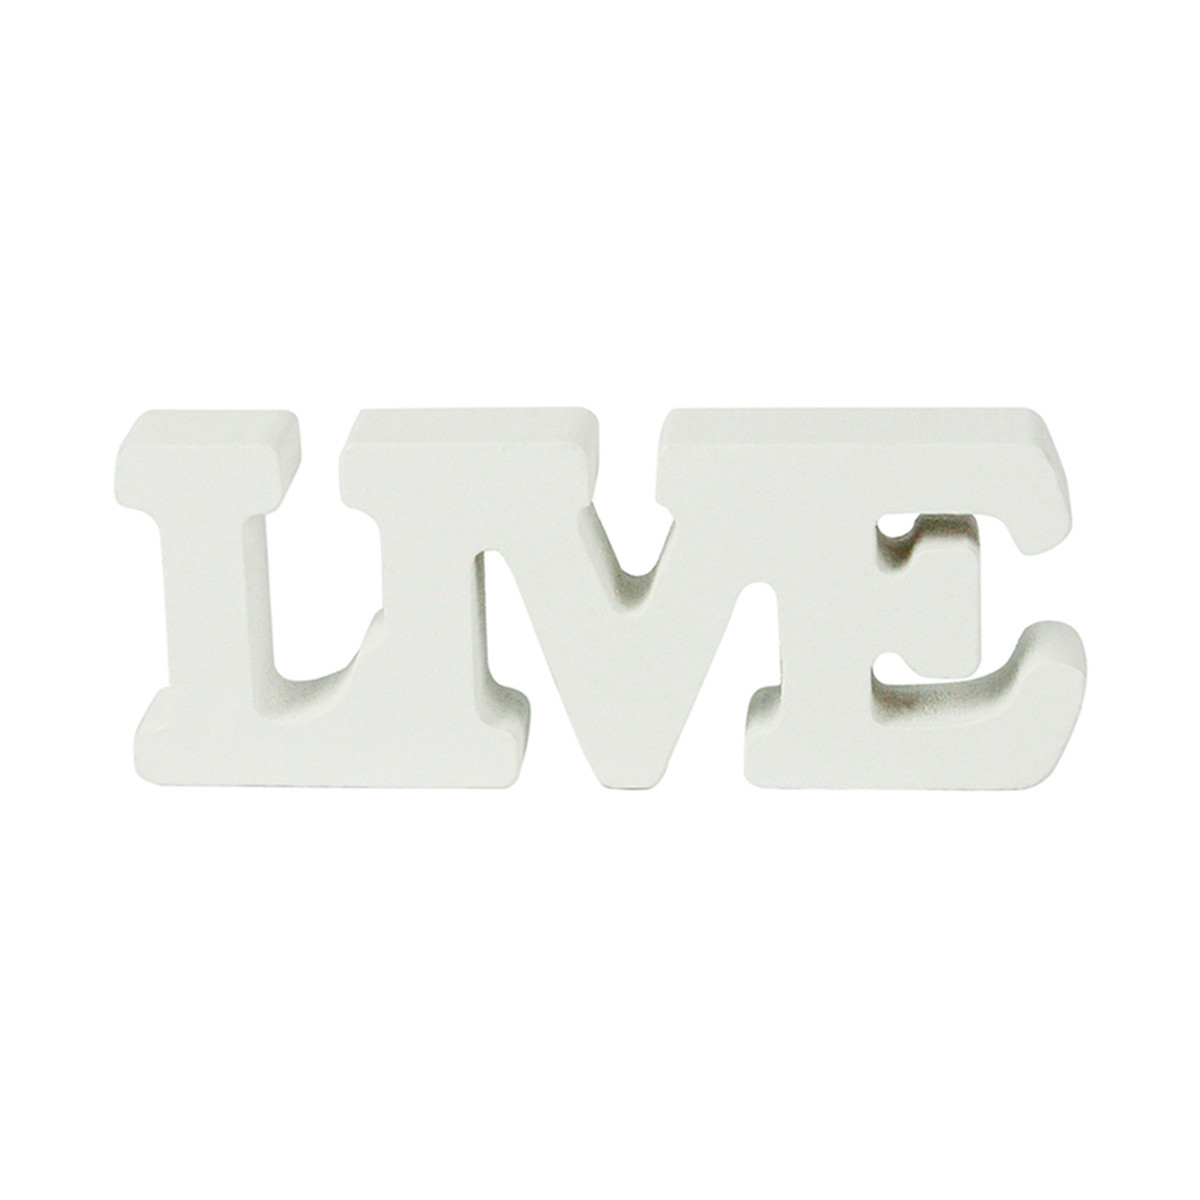 Make Shoppe 'Live' Wooden Letters Sign, White